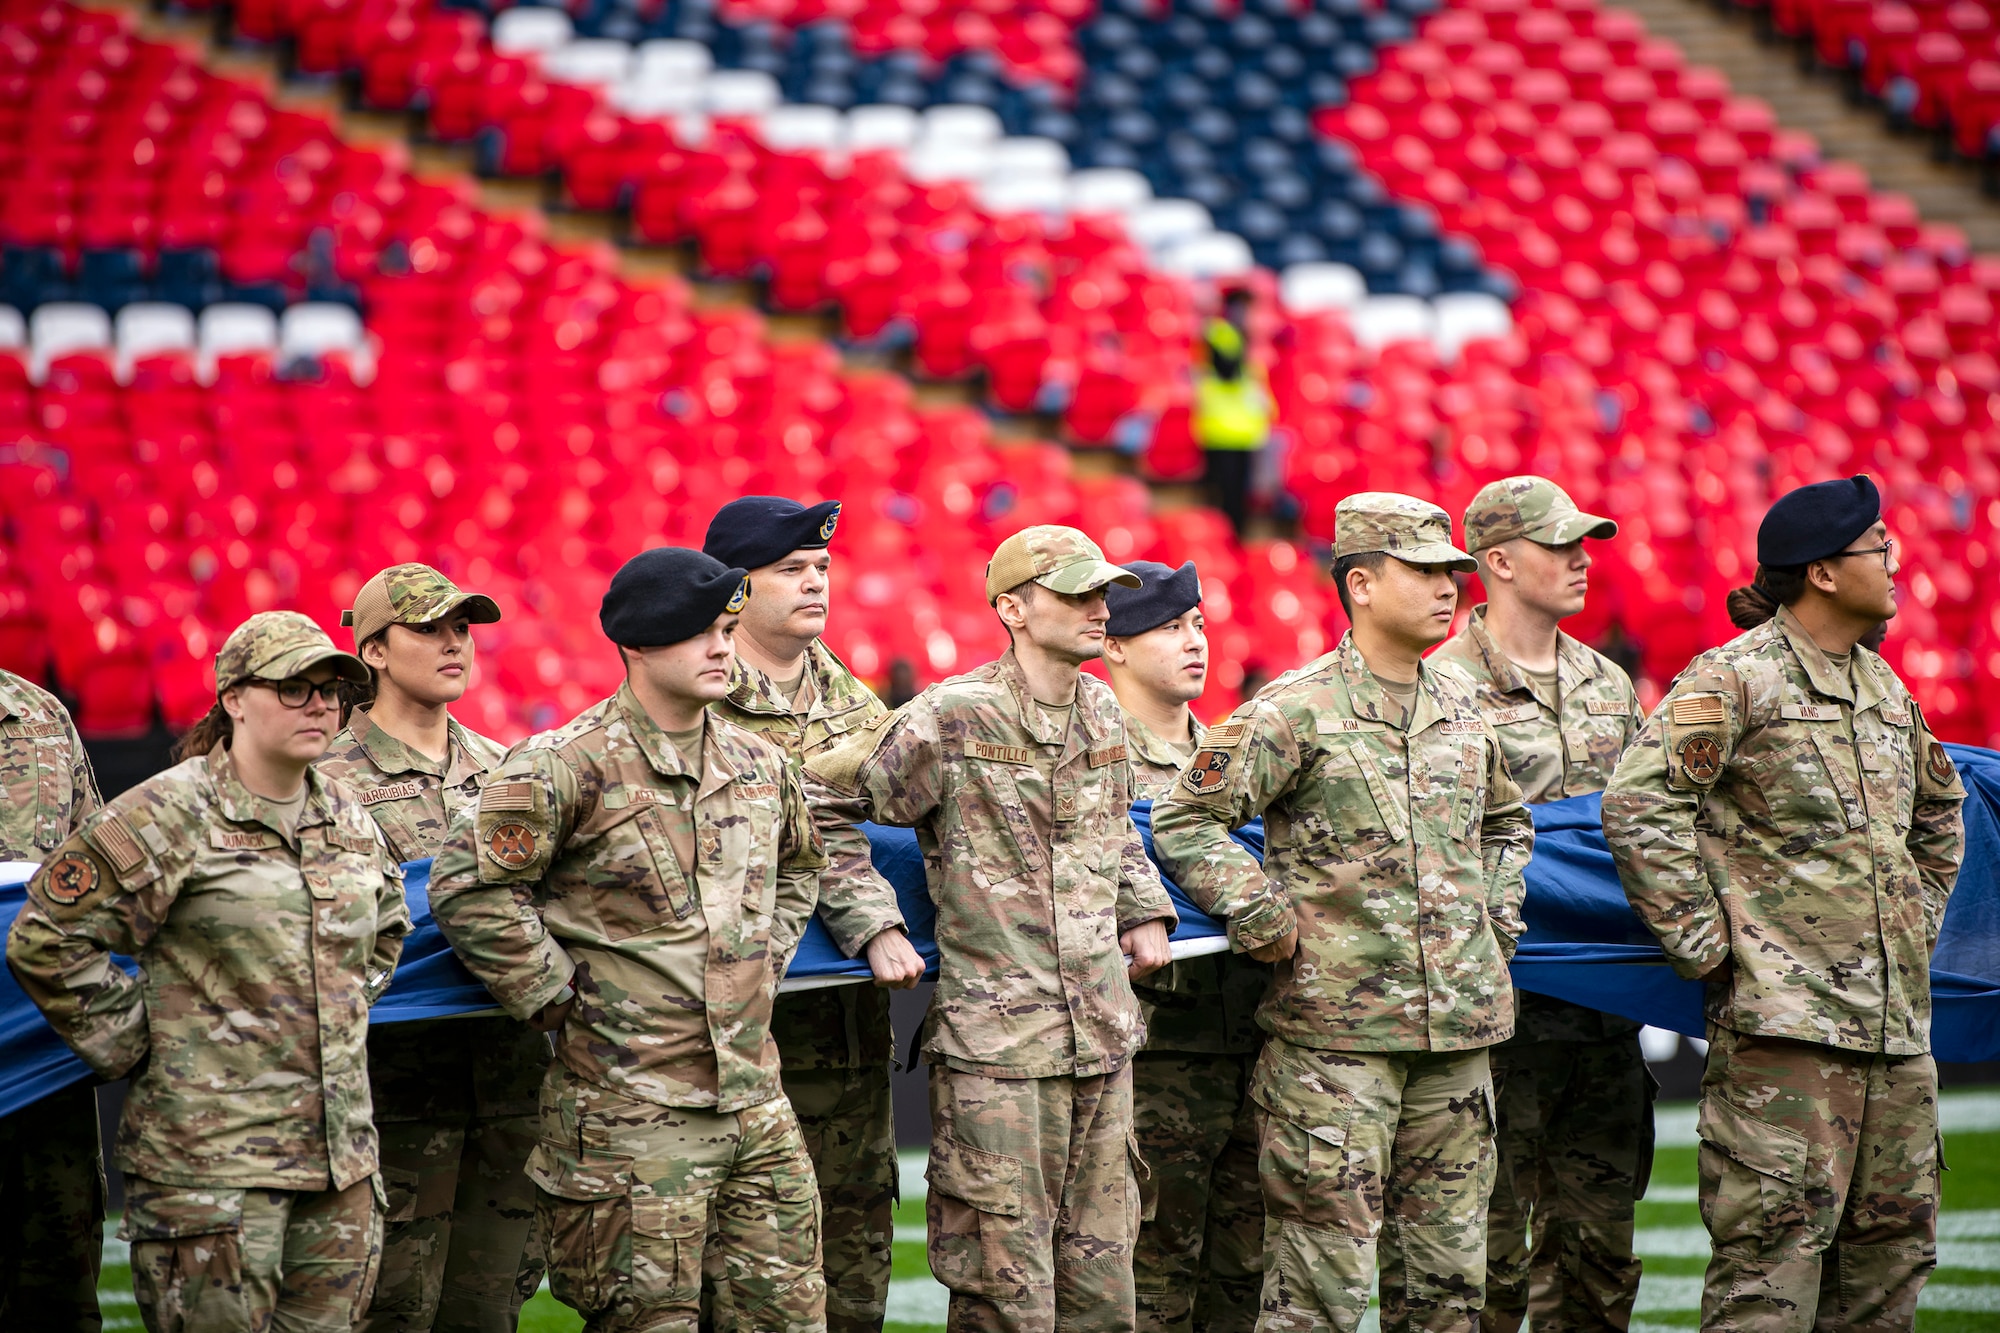 Airmen from the 501st Combat Support Wing hold an American flag during national anthem rehearsal at Wembley Stadium, in London, England, Oct. 30, 2022. Approximately 70 uniformed personnel represented the U.S. Air Force and nation by unveiling an American flag during the pre-game ceremonies of the Jacksonville Jaguars and Denver Broncos NFL game. (U.S. Air Force photo by Staff Sgt. Eugene Oliver)